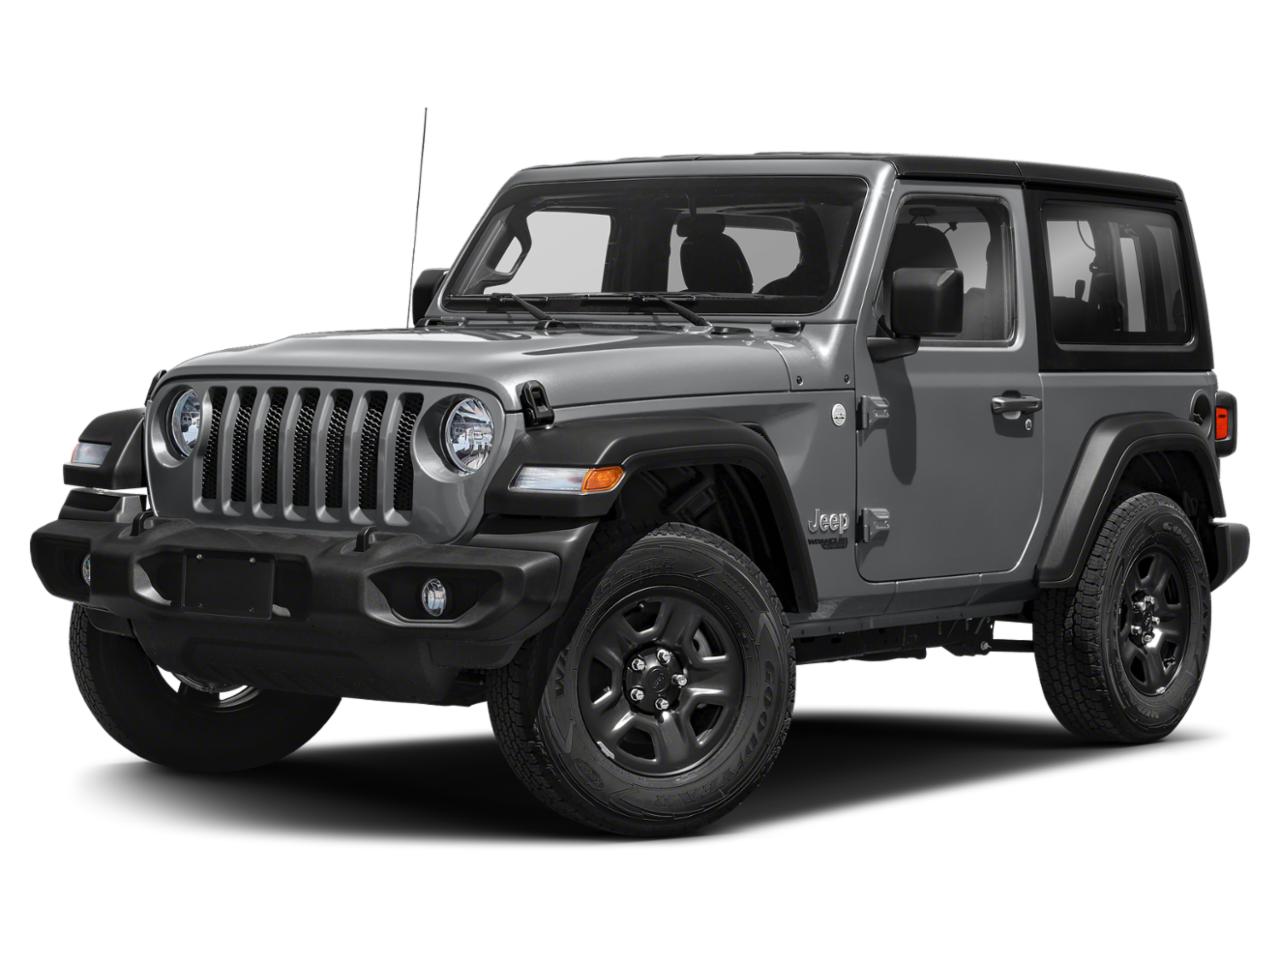 Used, Certified, Loaner Jeep Wrangler Vehicles for Sale | Reed Nissan  Orlando